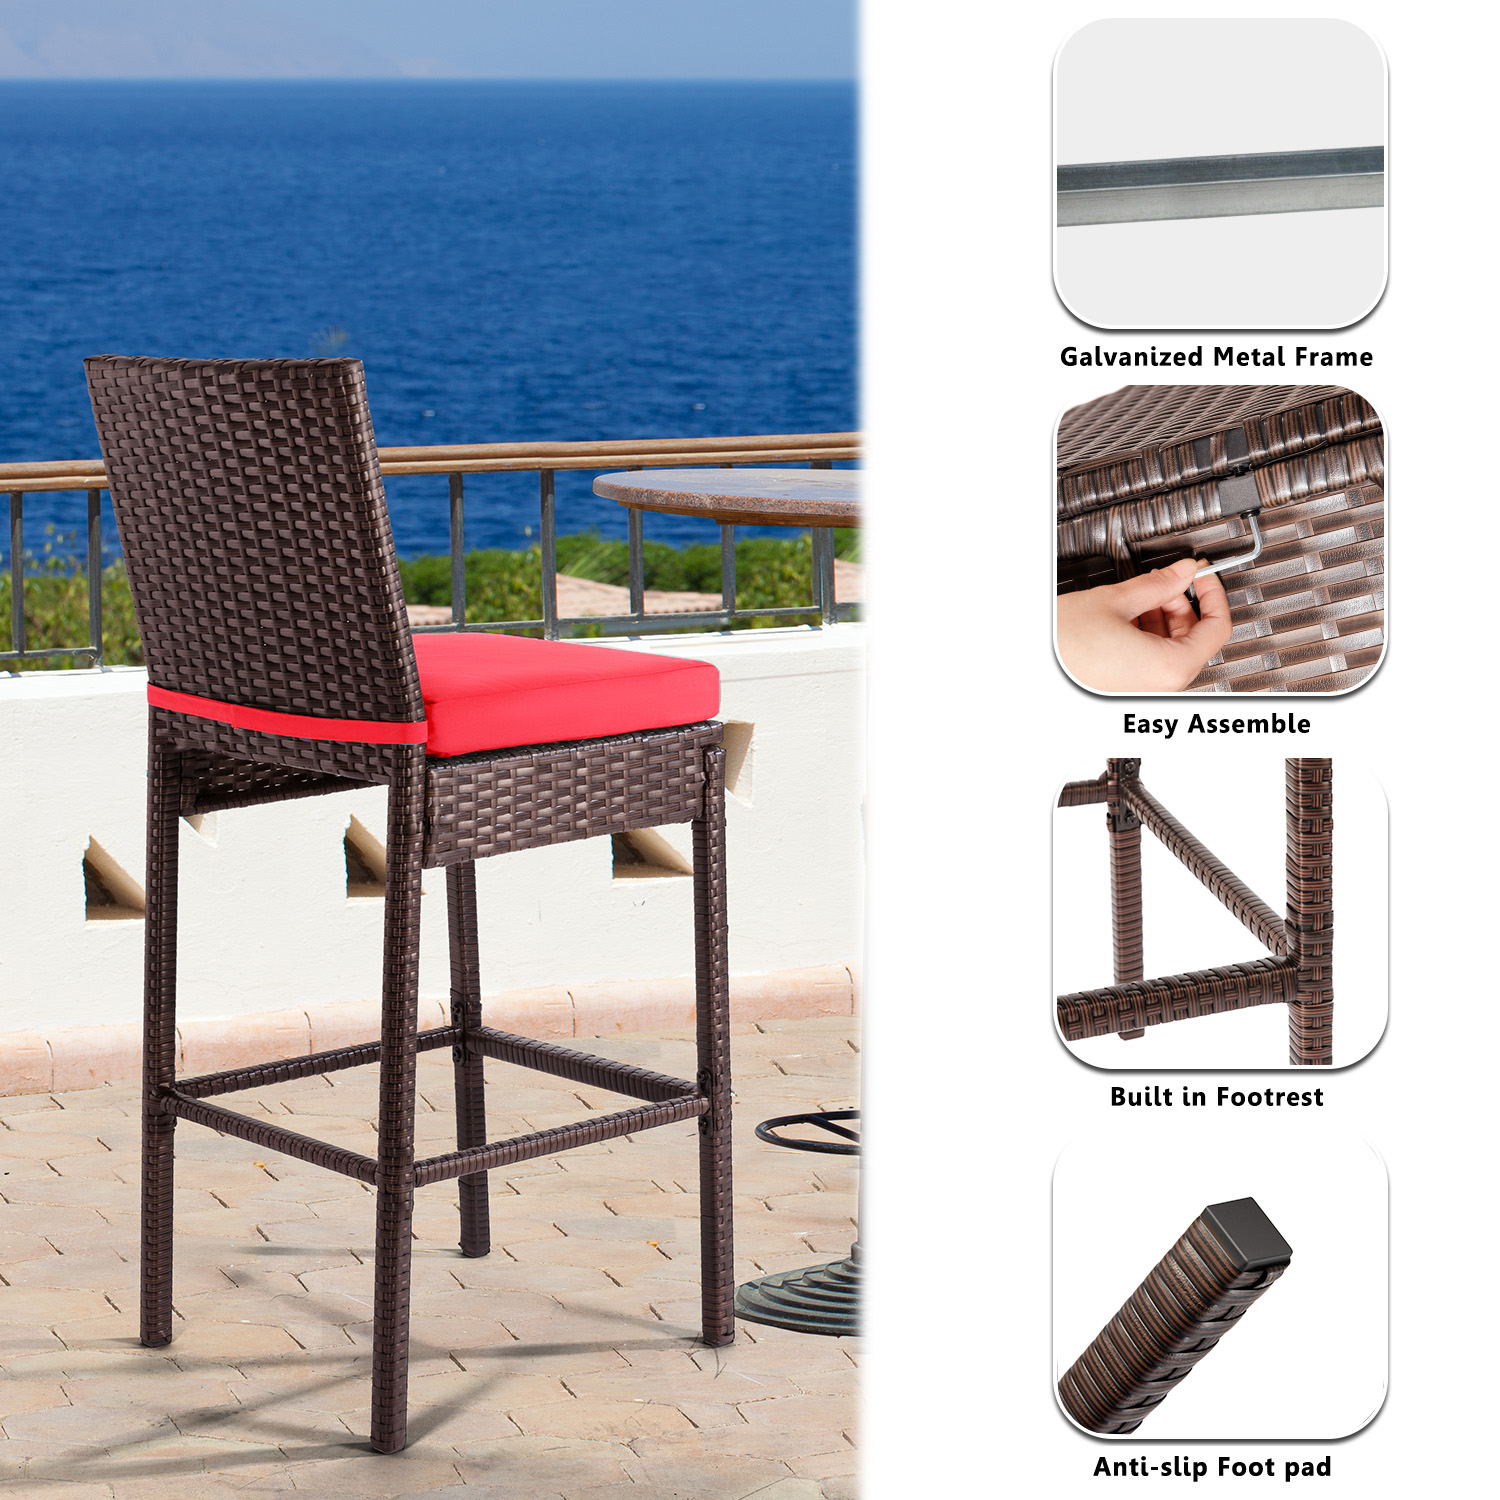 Patio Stools & Bar Chairs Outdoor Wicker Bar Stools Set of 2 Counter Height Bar Stools Patio Chairs Bar Height with Footrest Armless Cushion Red All Weather Rattan for Garden Pool Lawn Backyard - image 4 of 7